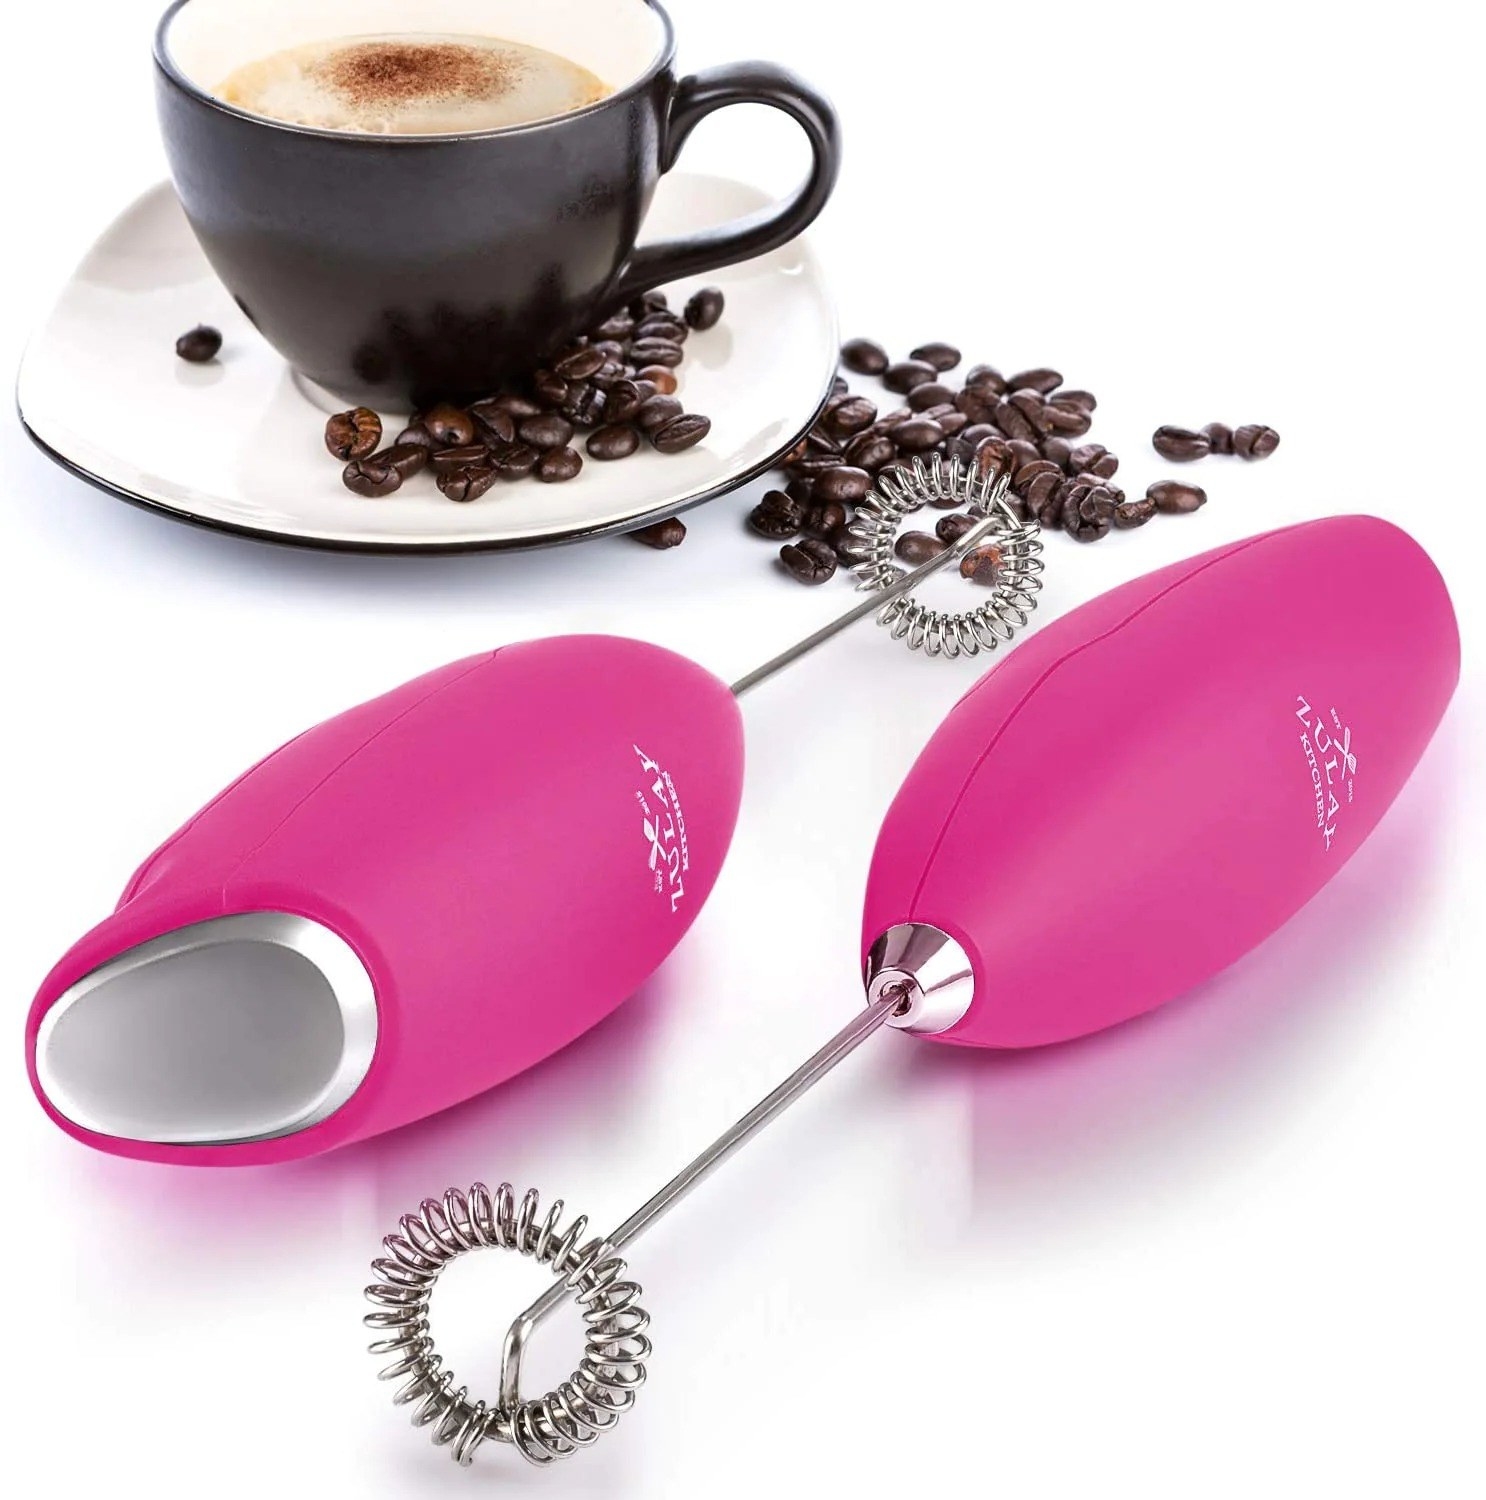 the pink frother next to a cup of coffee and beans